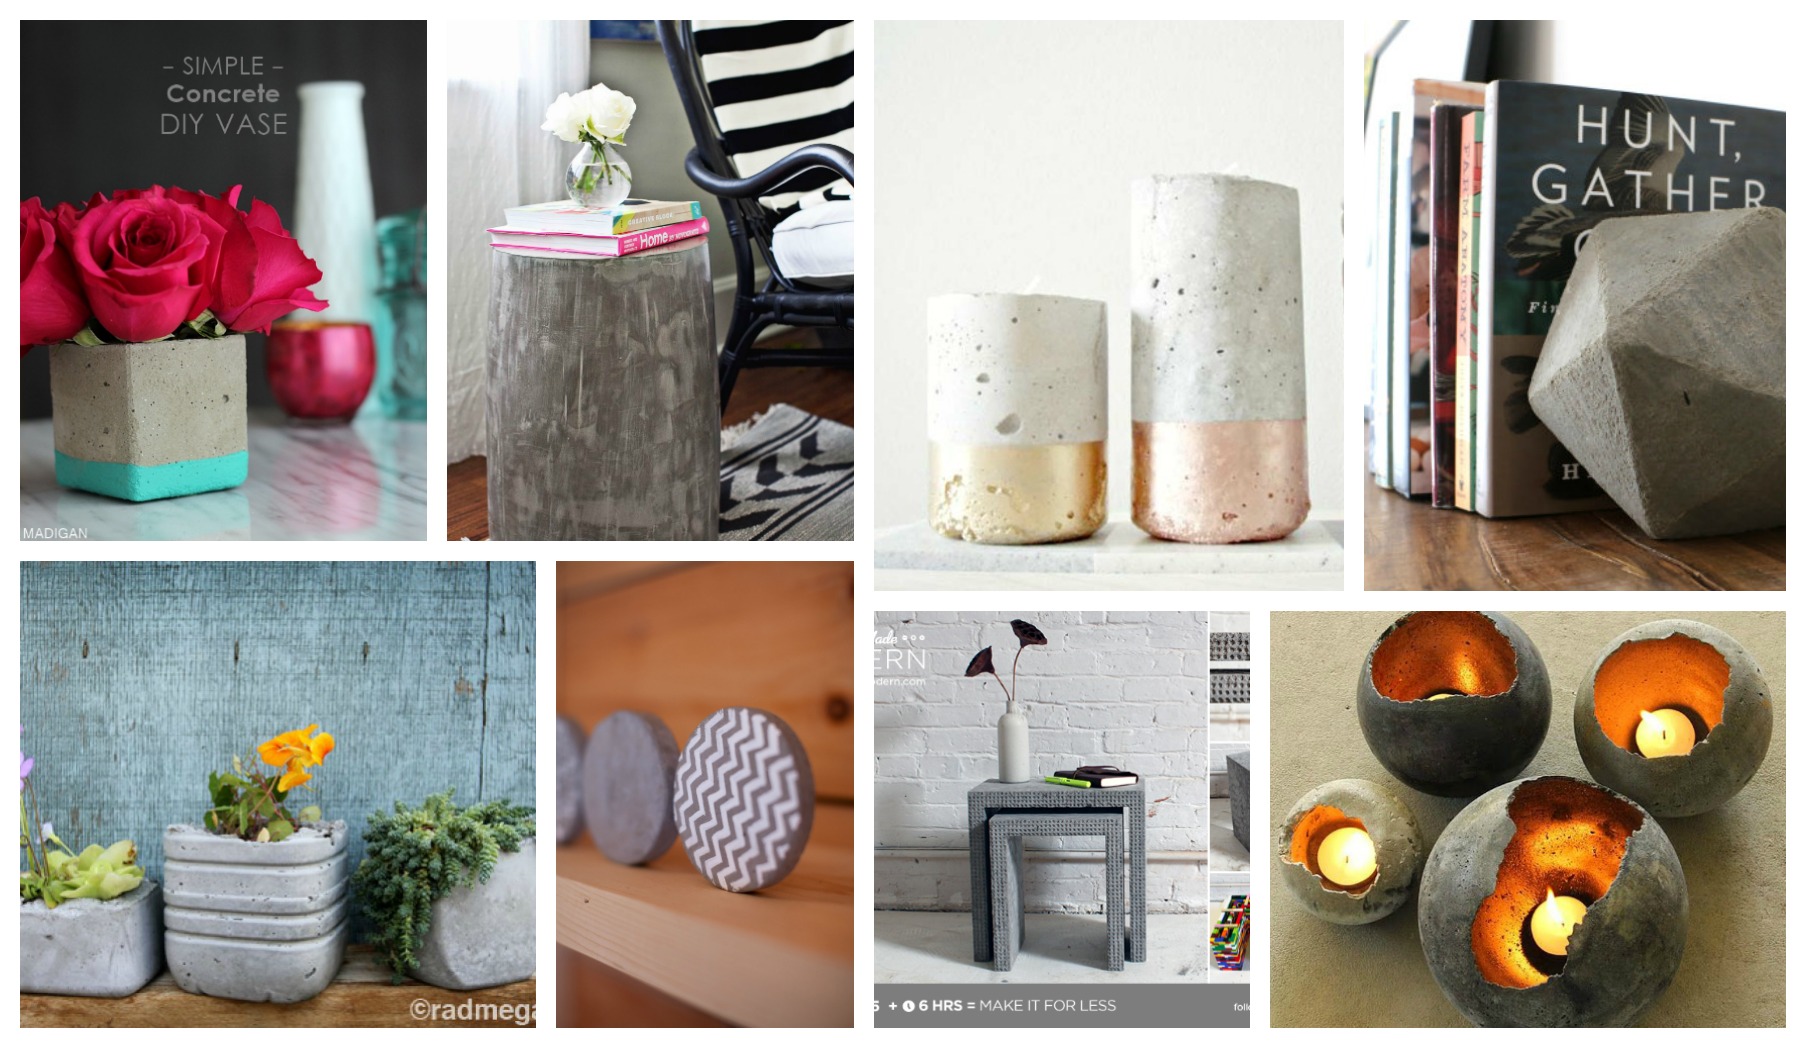 Cool And Easy DIY Concrete Projects For Stylish Home Decor - Top Dreamer